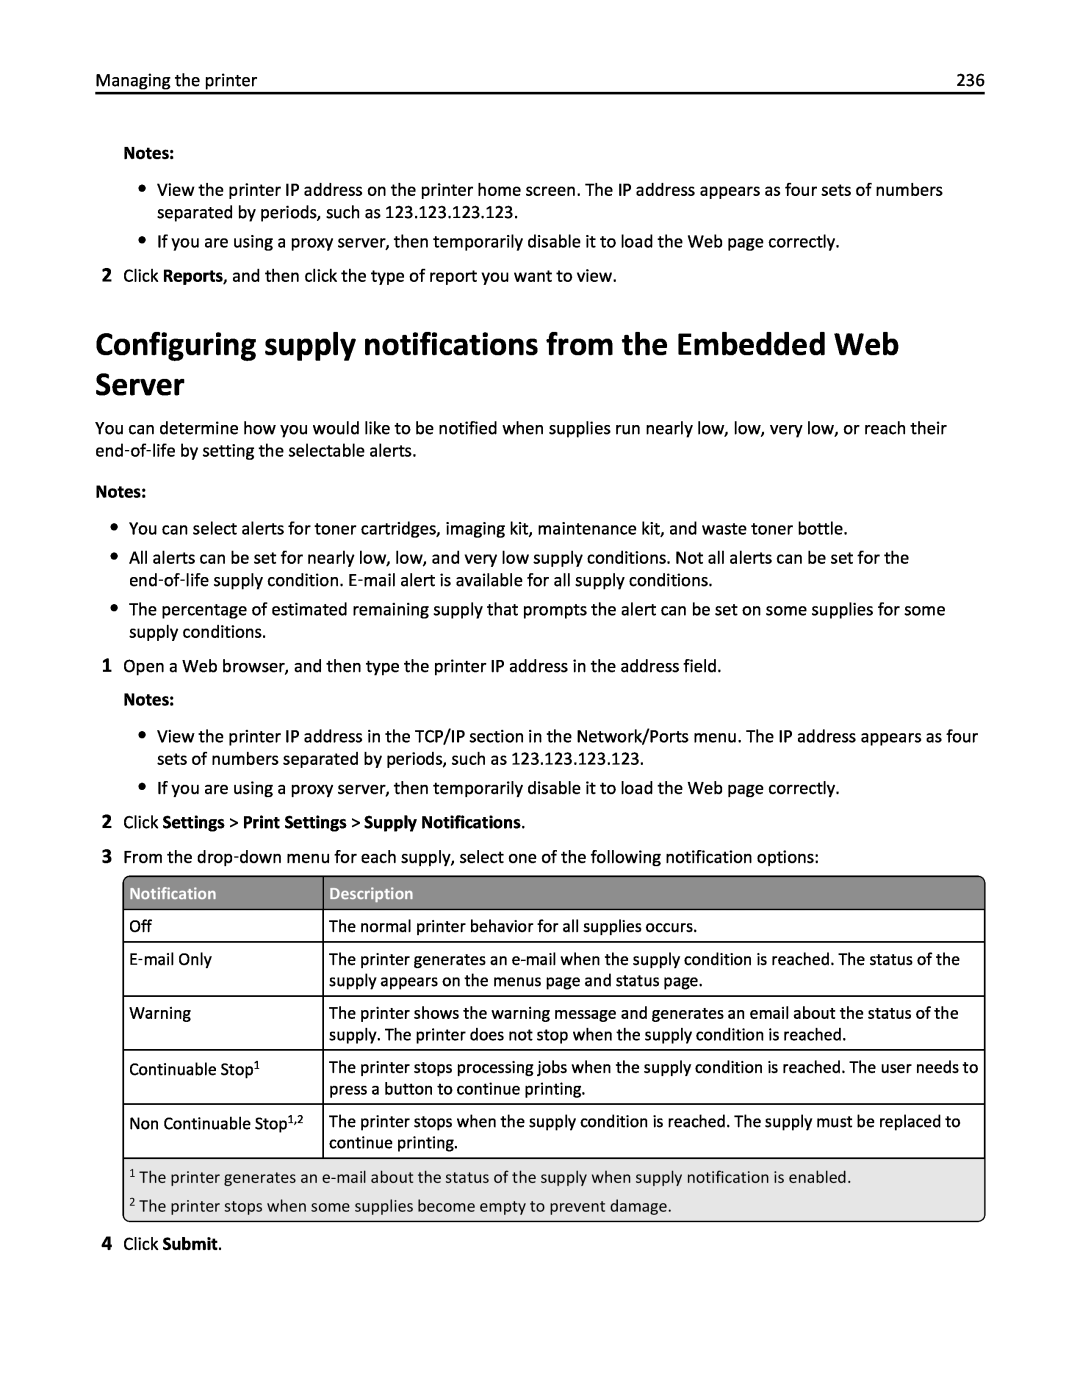 Lexmark 436 manual Configuring supply notifications from the Embedded Web Server 